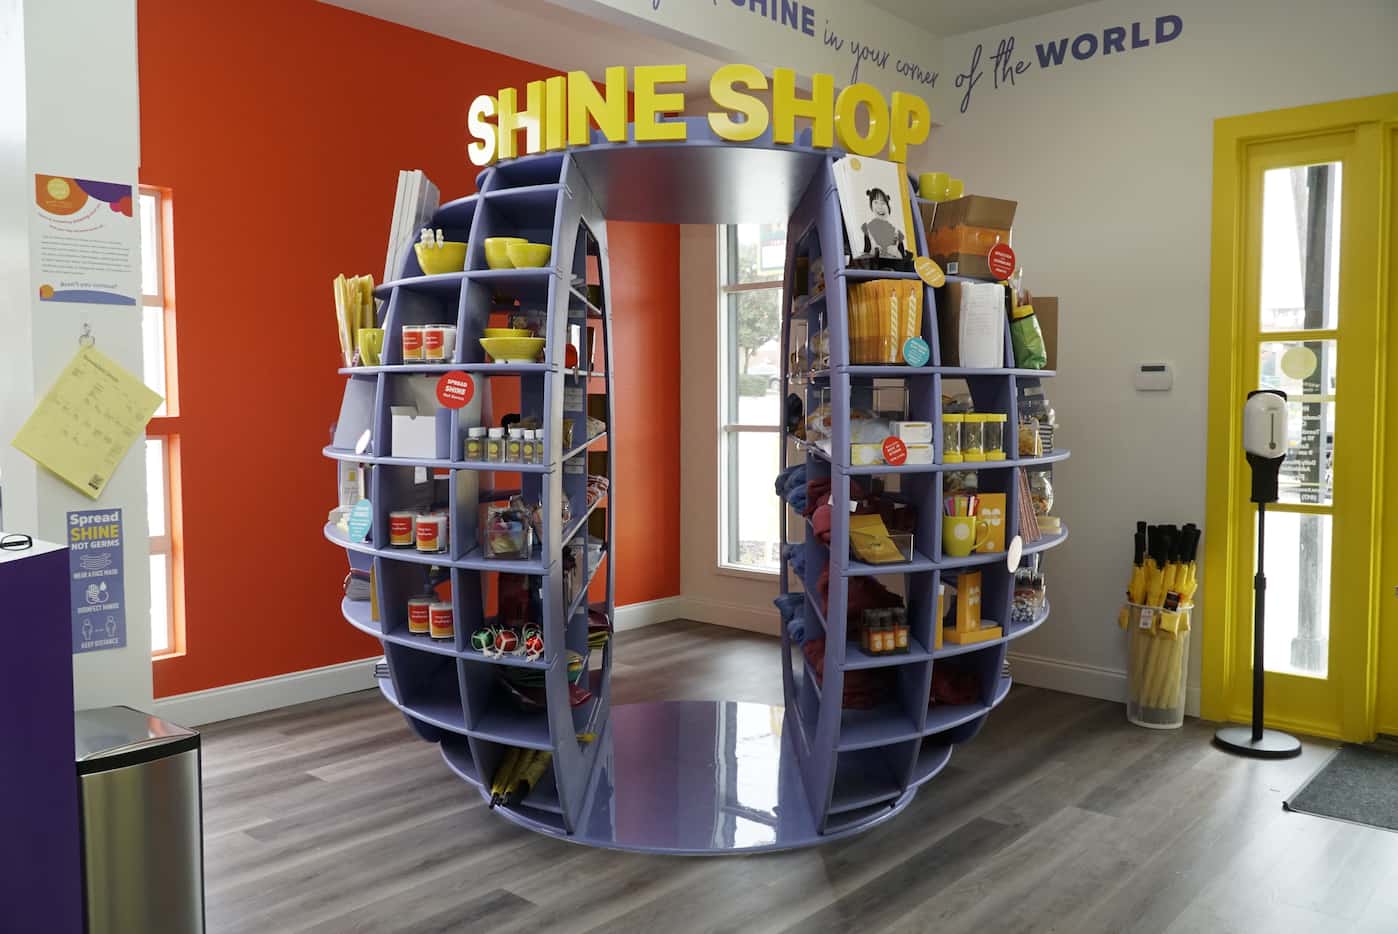 The Shine Shop has paraphernalia at House of Shine in Grapevine, Texas on Friday, November...